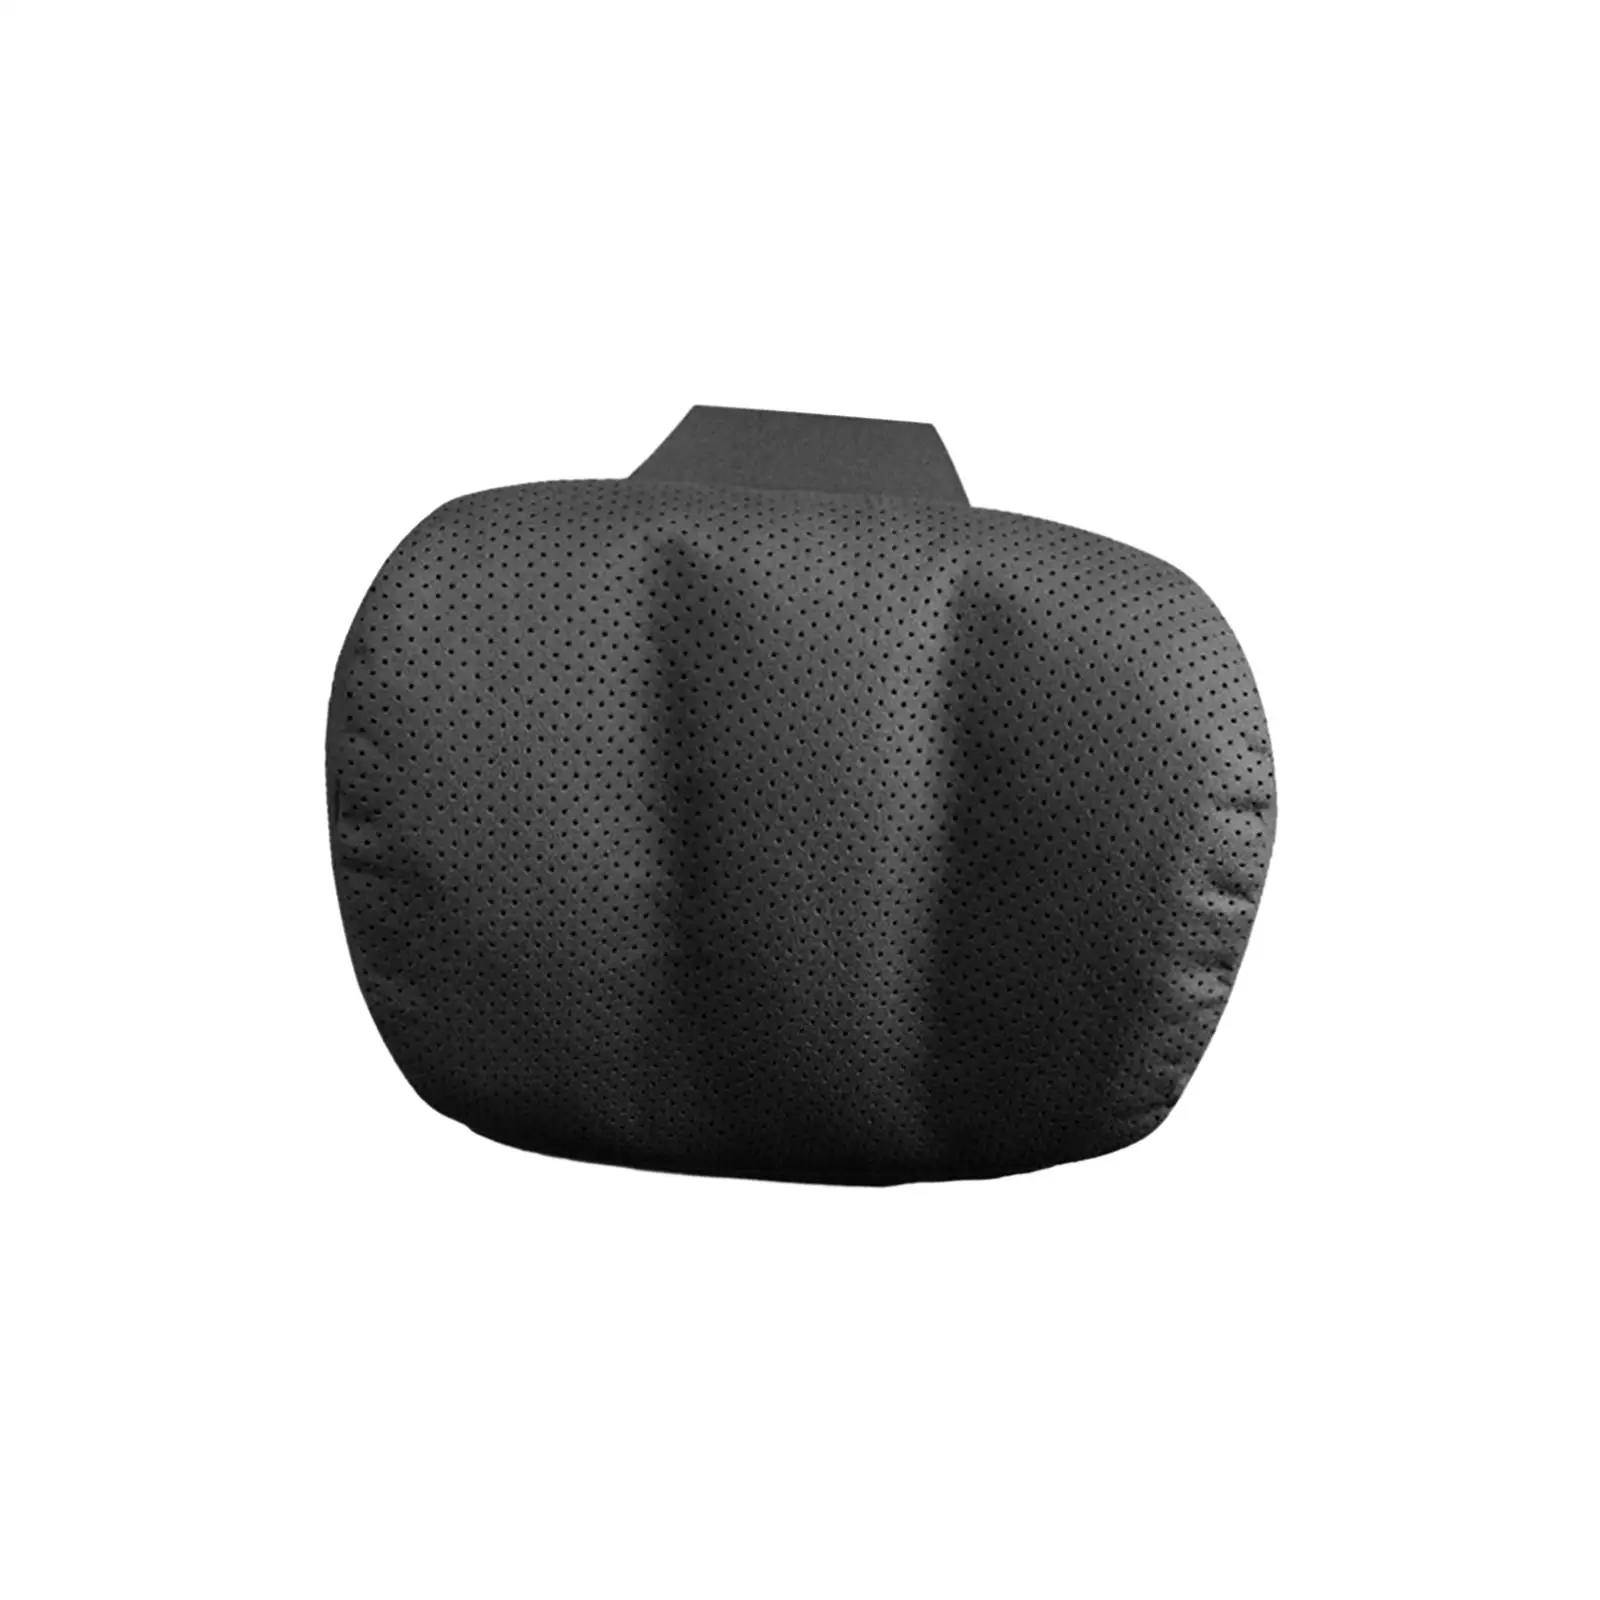 Head Rest Pillows Universal Comfortable Soft Breathable Premium Automotive Neck Support for Driving Seat Travel Home Office